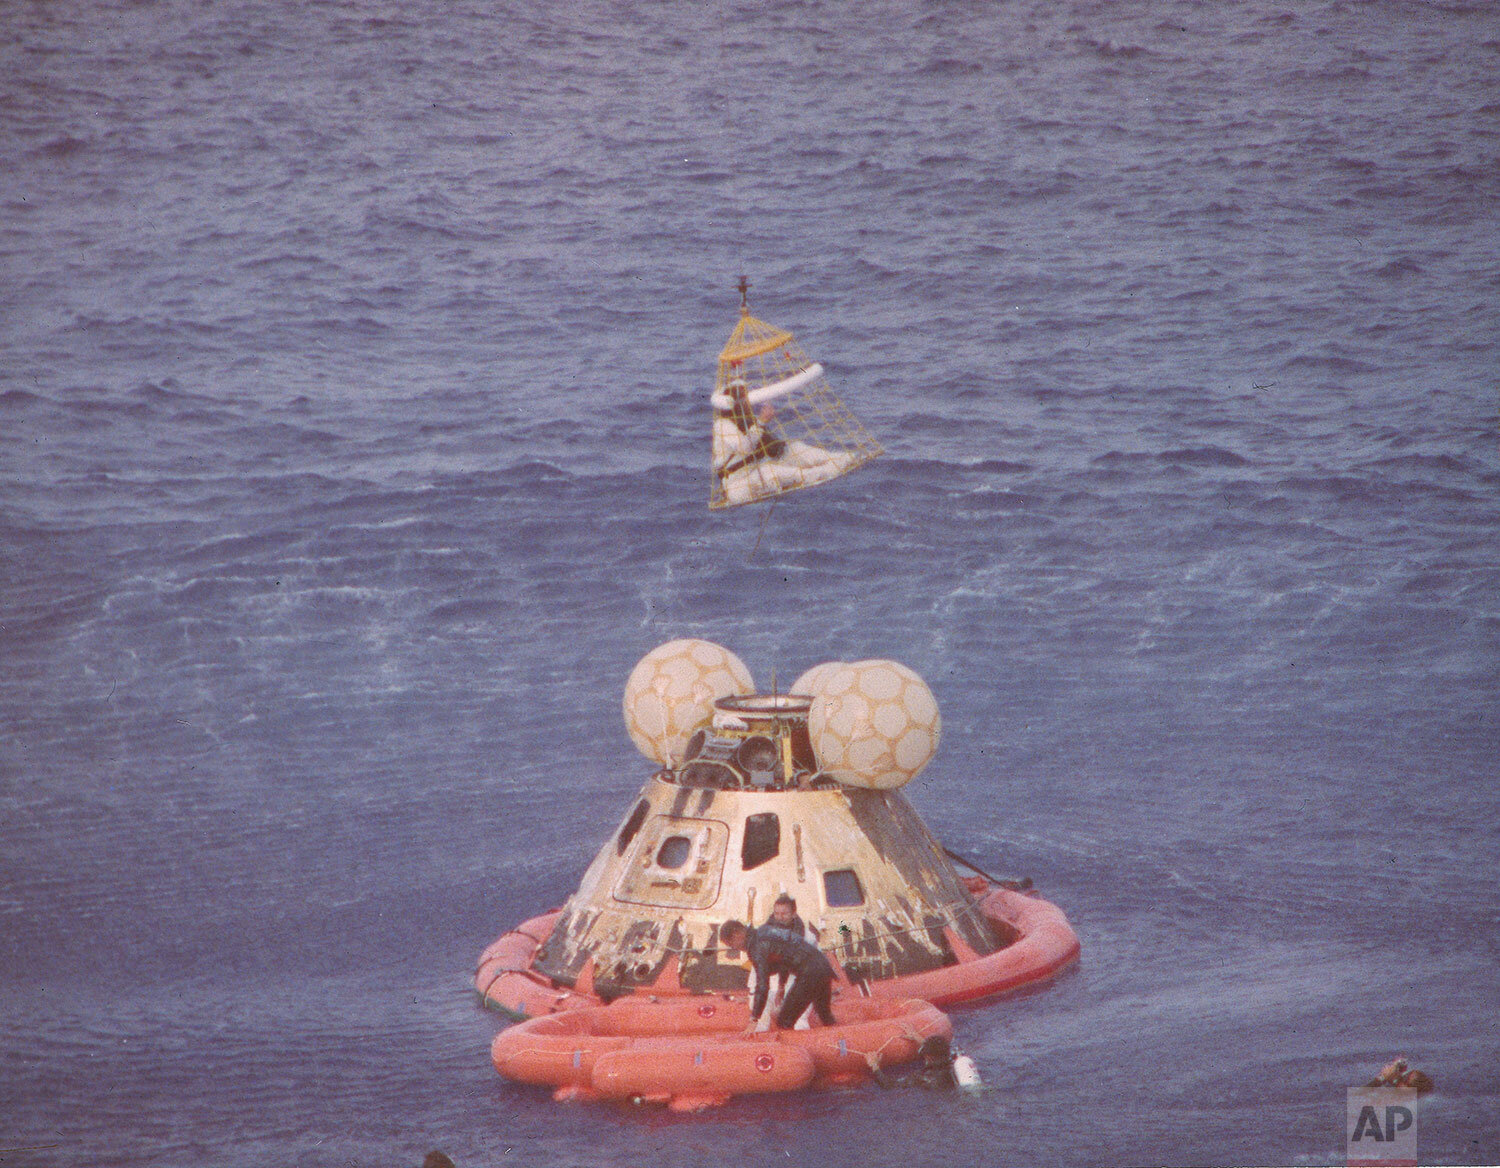  The Command Module Odyssey of the Apollo 13 space mission floats in the Pacific Ocean after splashdown near Samoa, April 17, 1970 while Navy personnel attempt to rescue the crew of three astronauts. (AP Photo) 